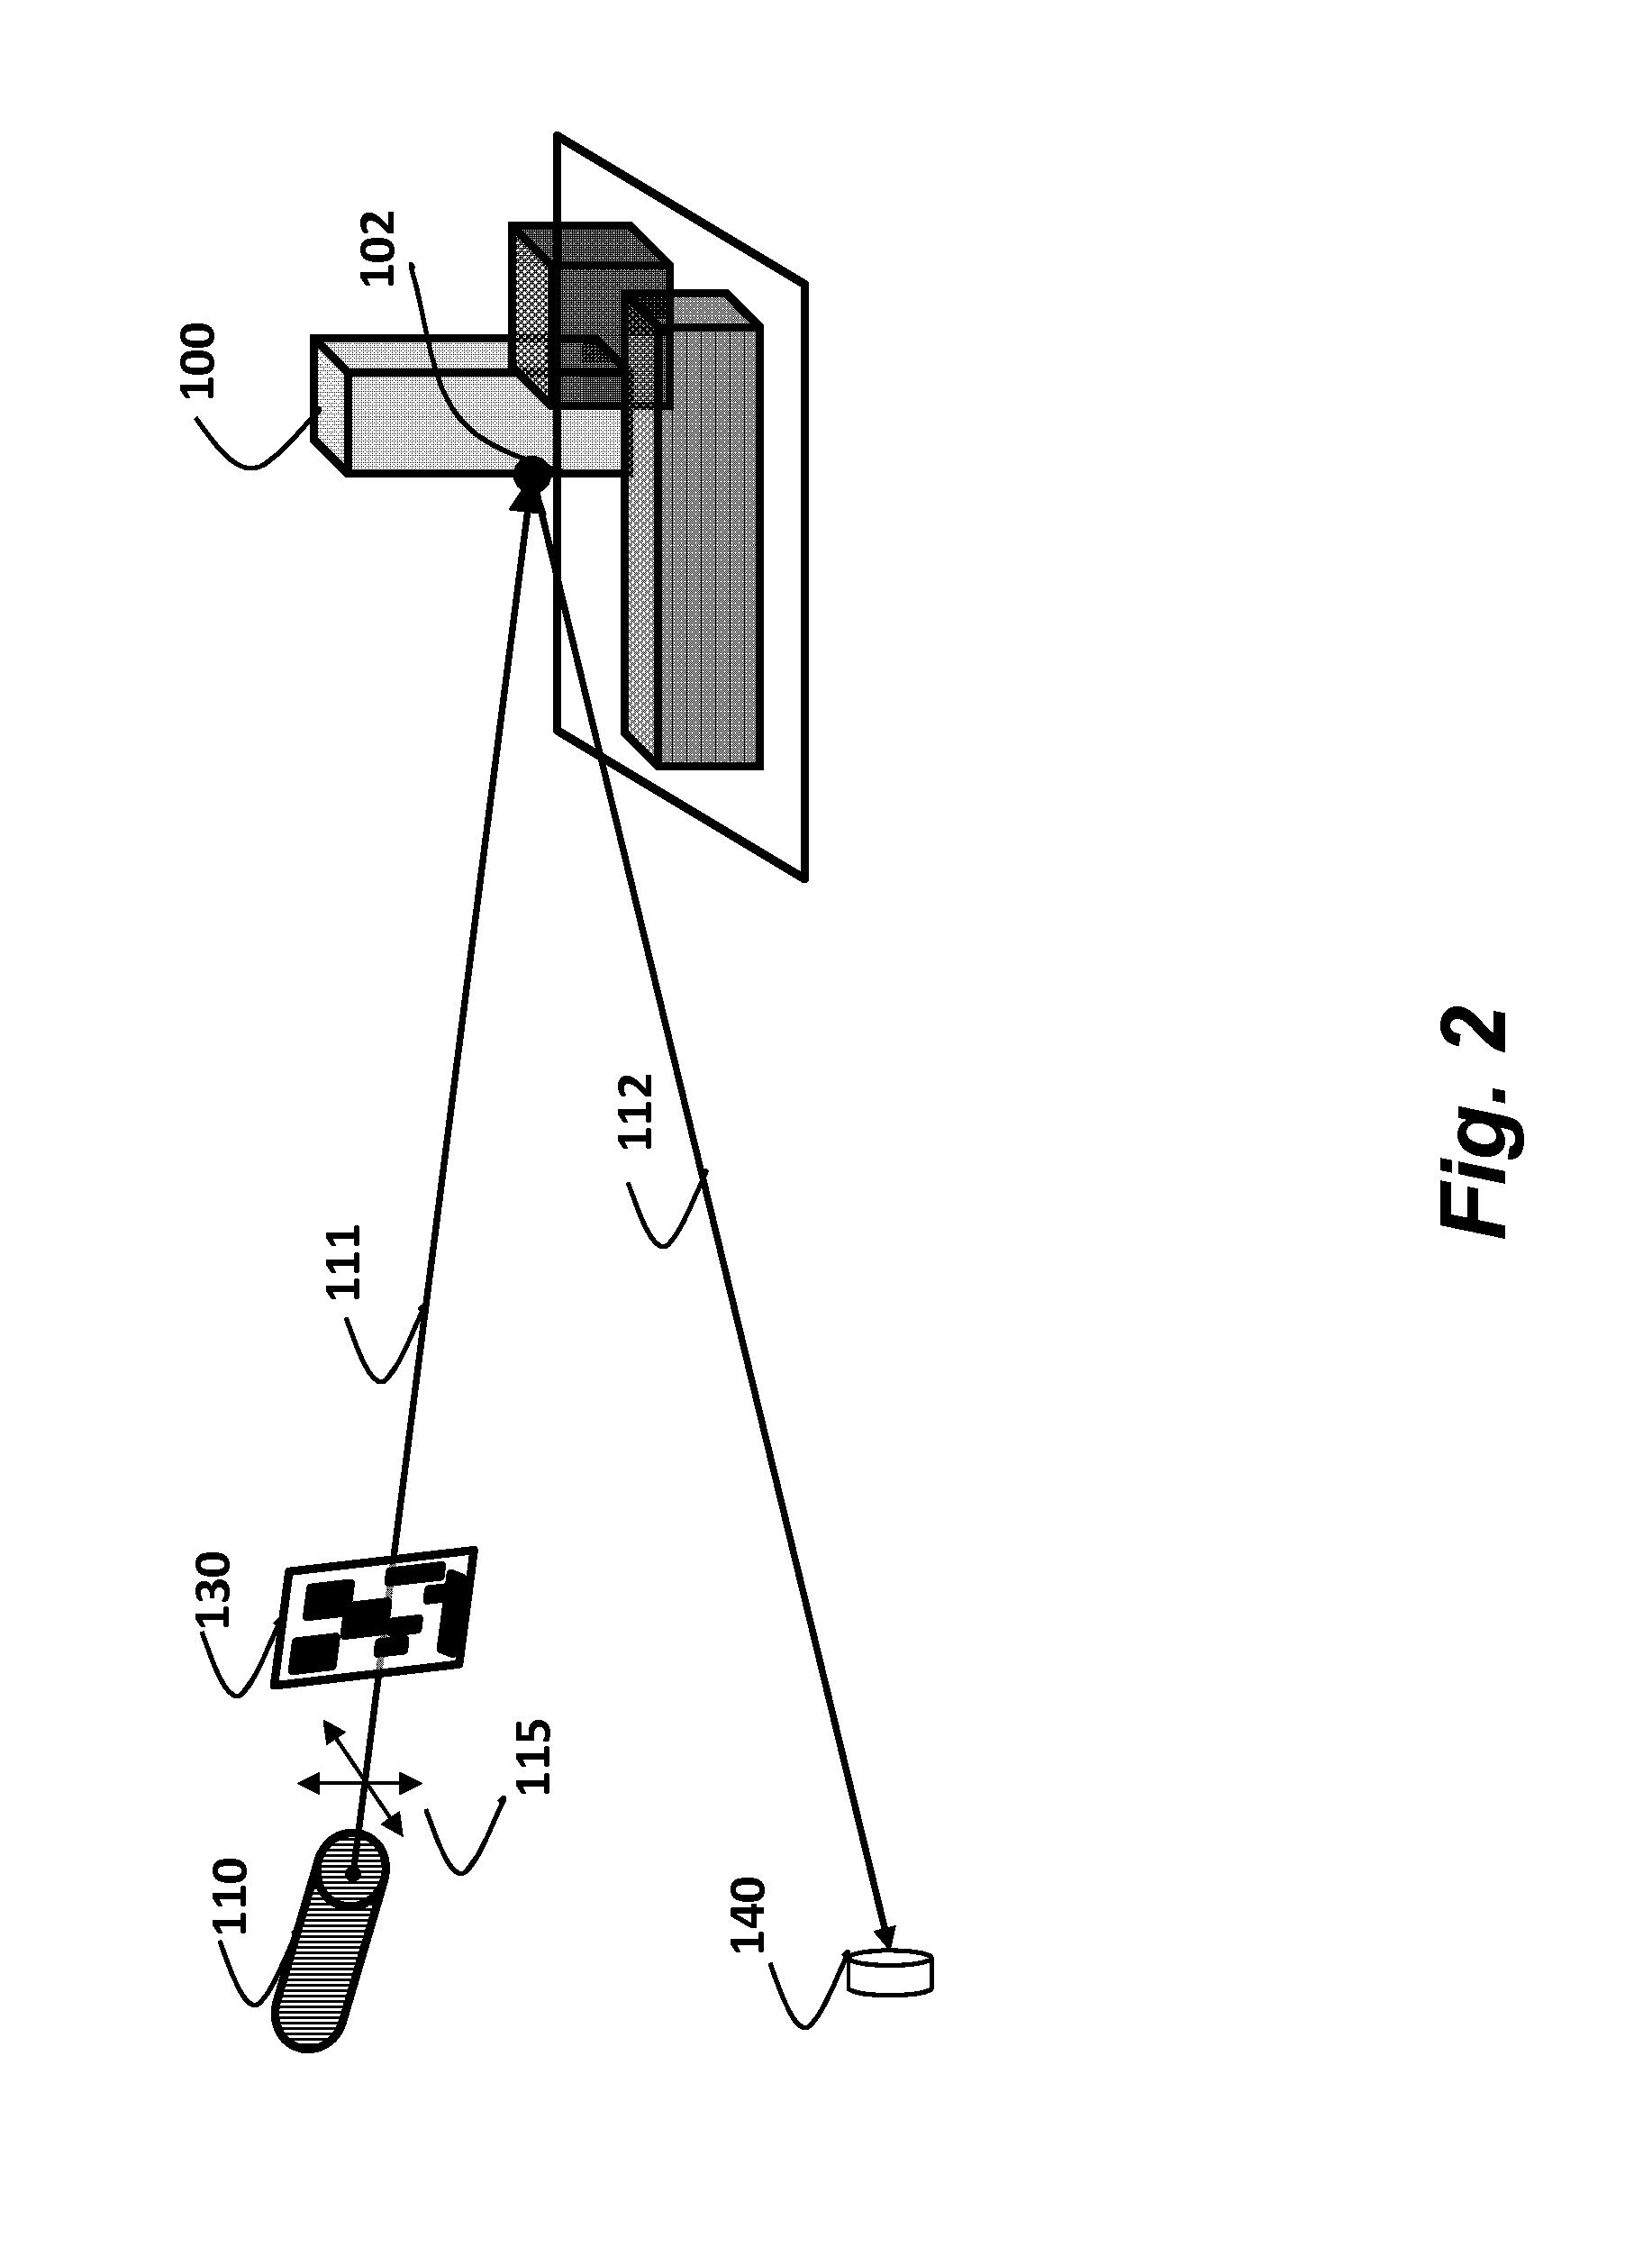 Depth Sensing Using Optical Pulses and Fixed Coded Aperature